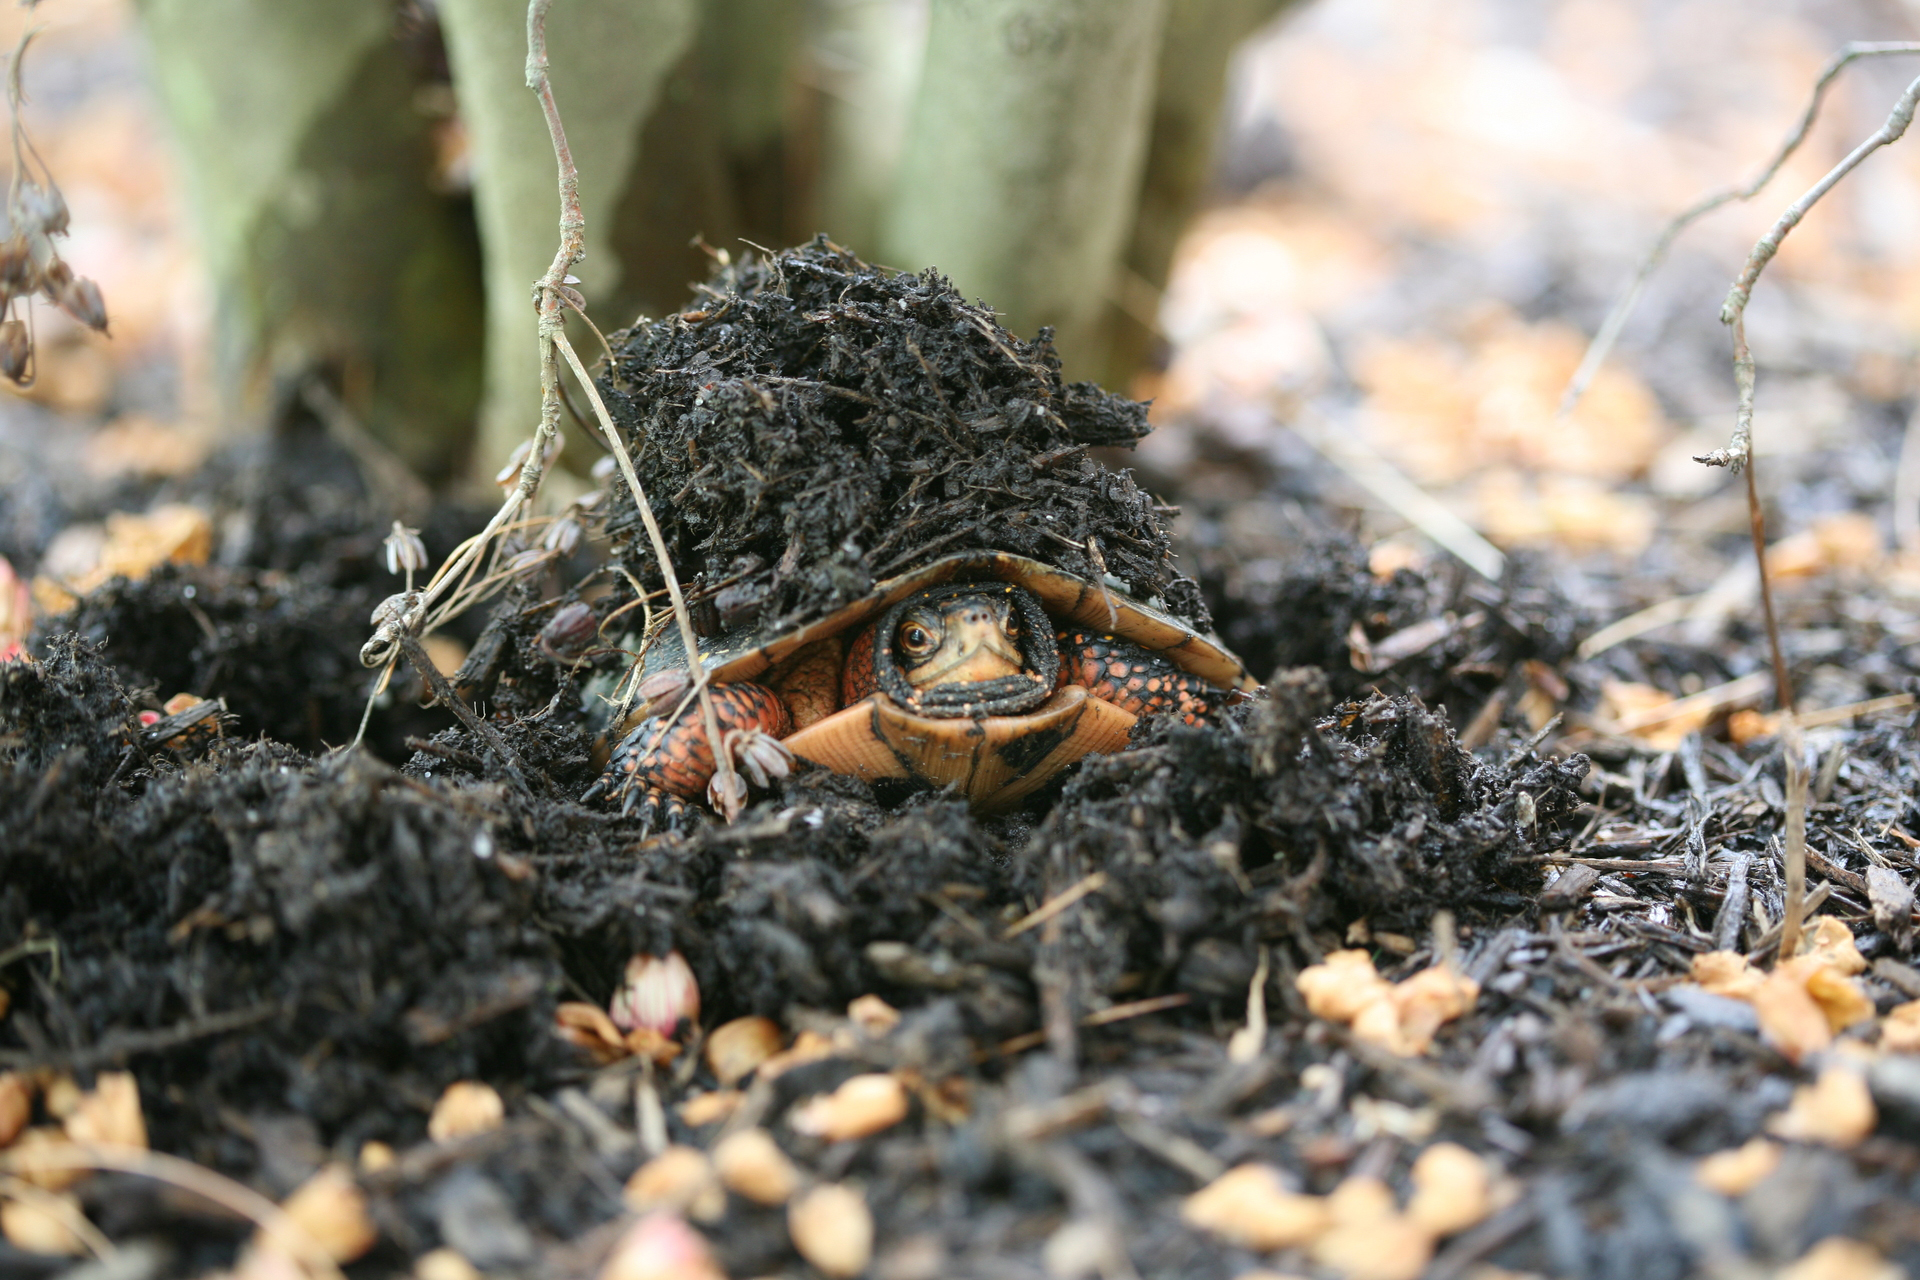 Eastern box turtle under a small pile of mulch